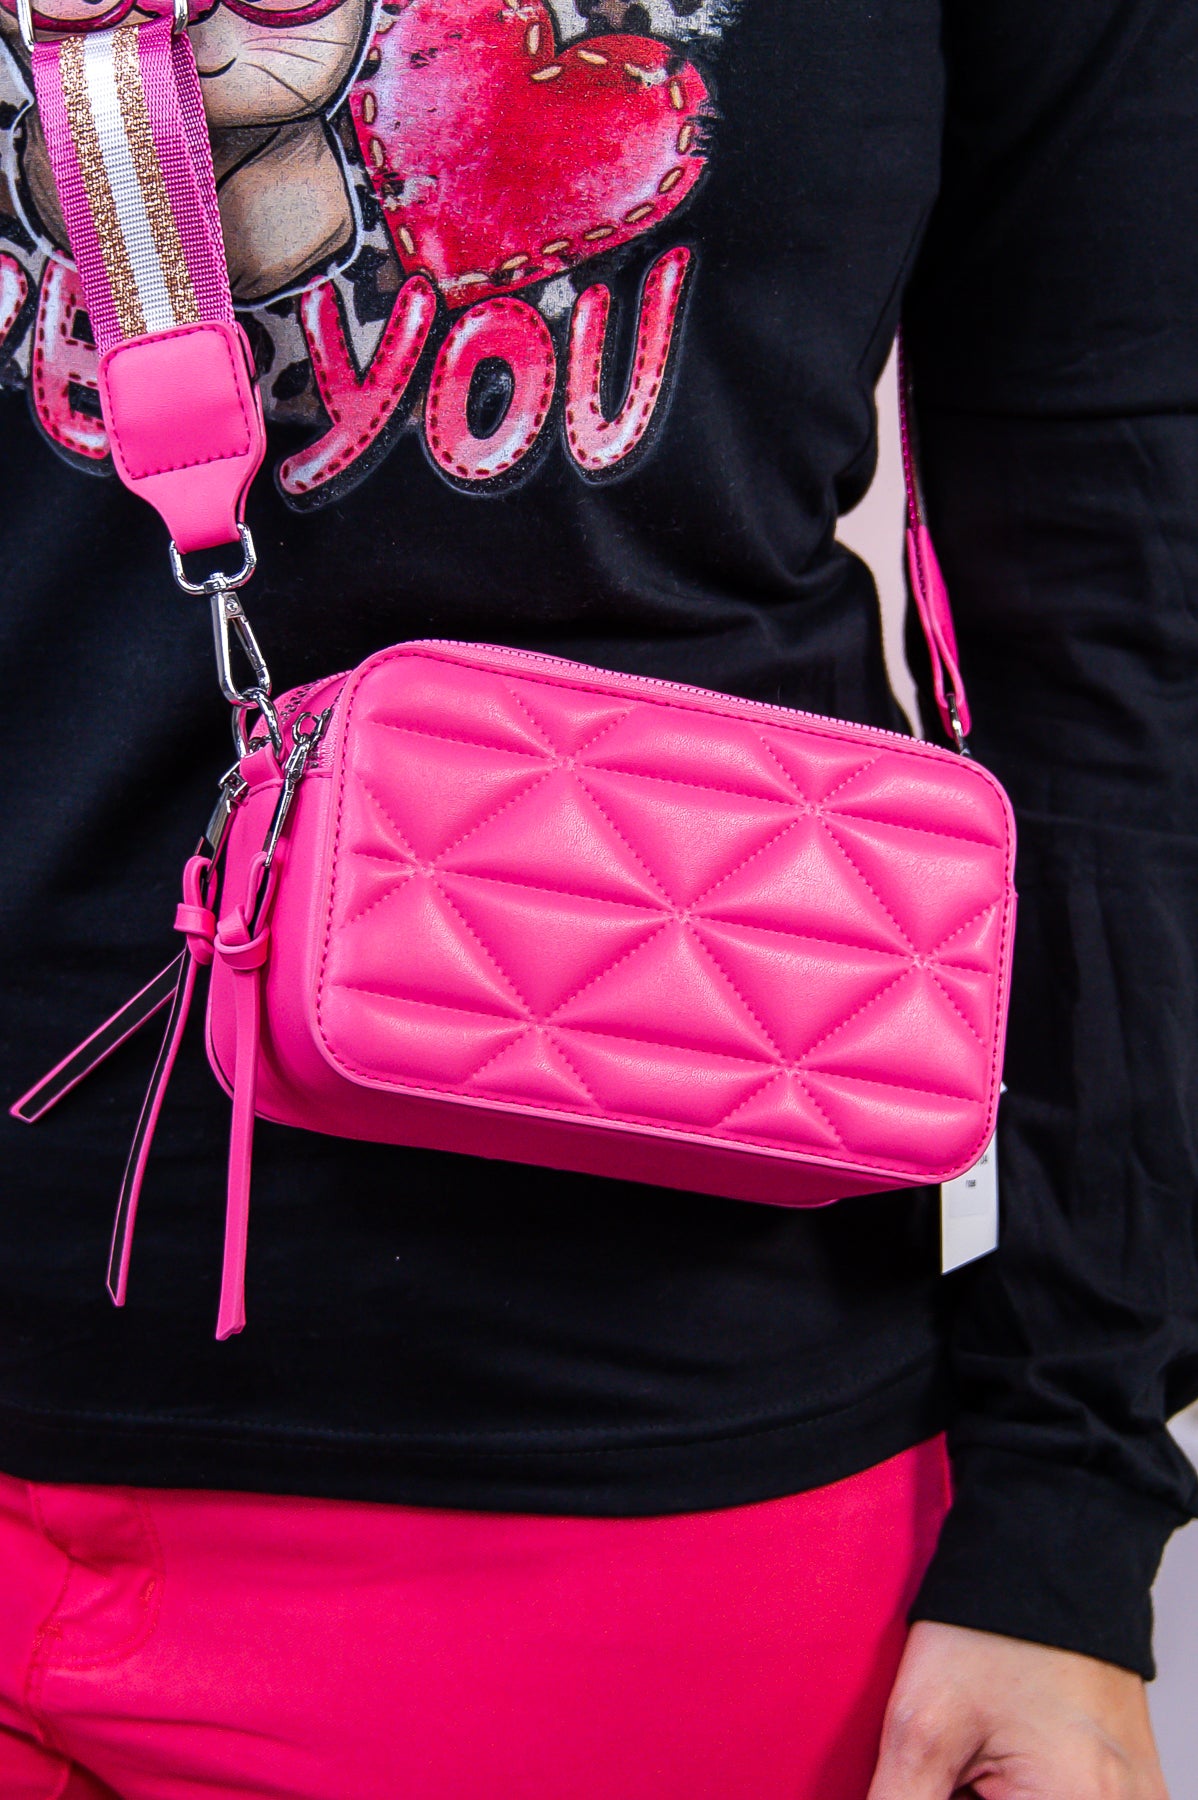 Give Me Hope Hot Pink Solid Chevron Quilted Bag - BAG1863HPK